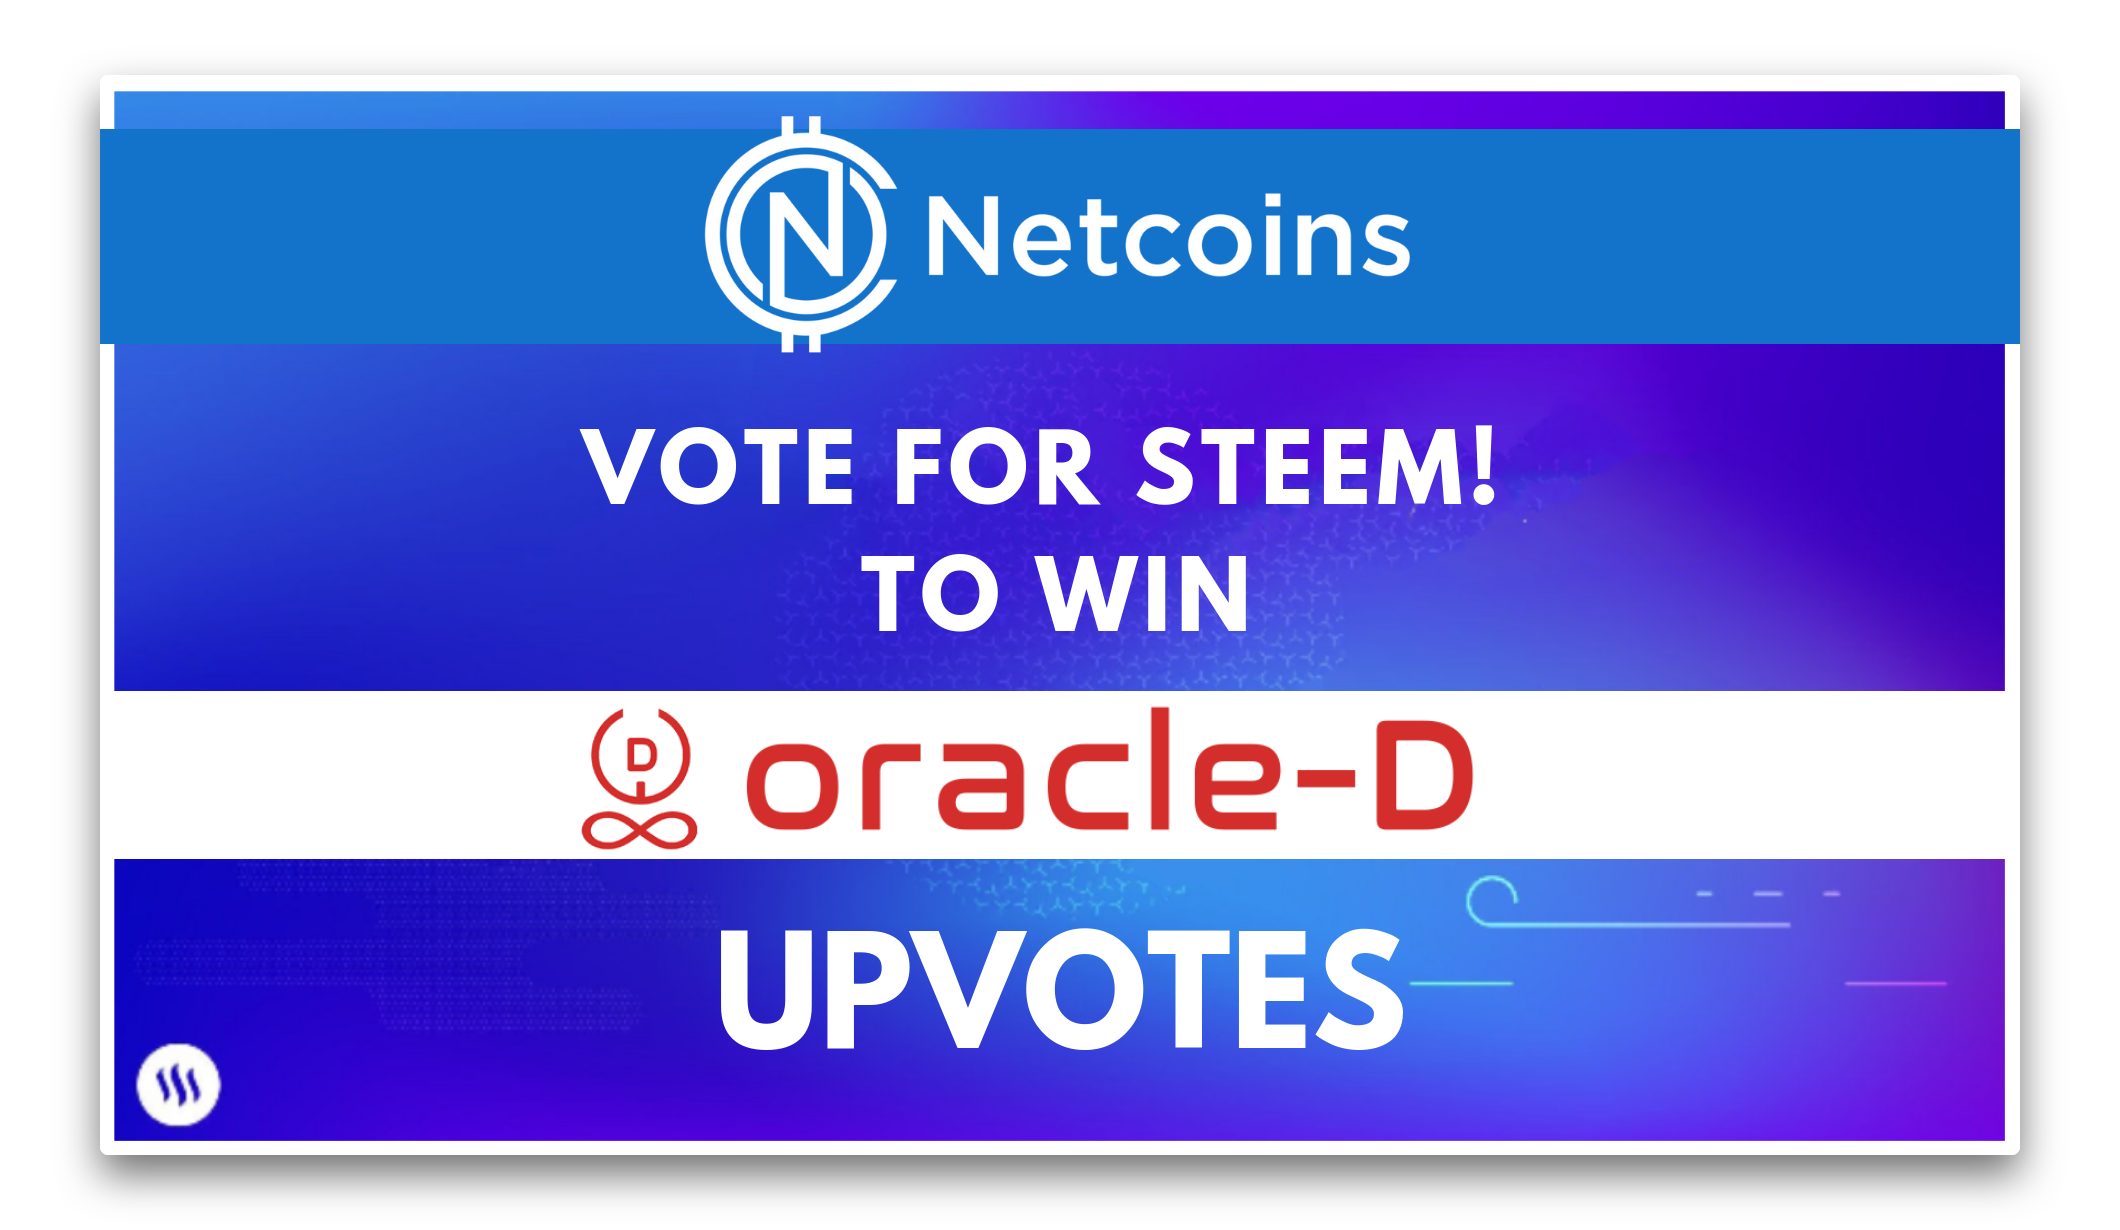 Let's do Steem community a favor and get a $1 worth vote